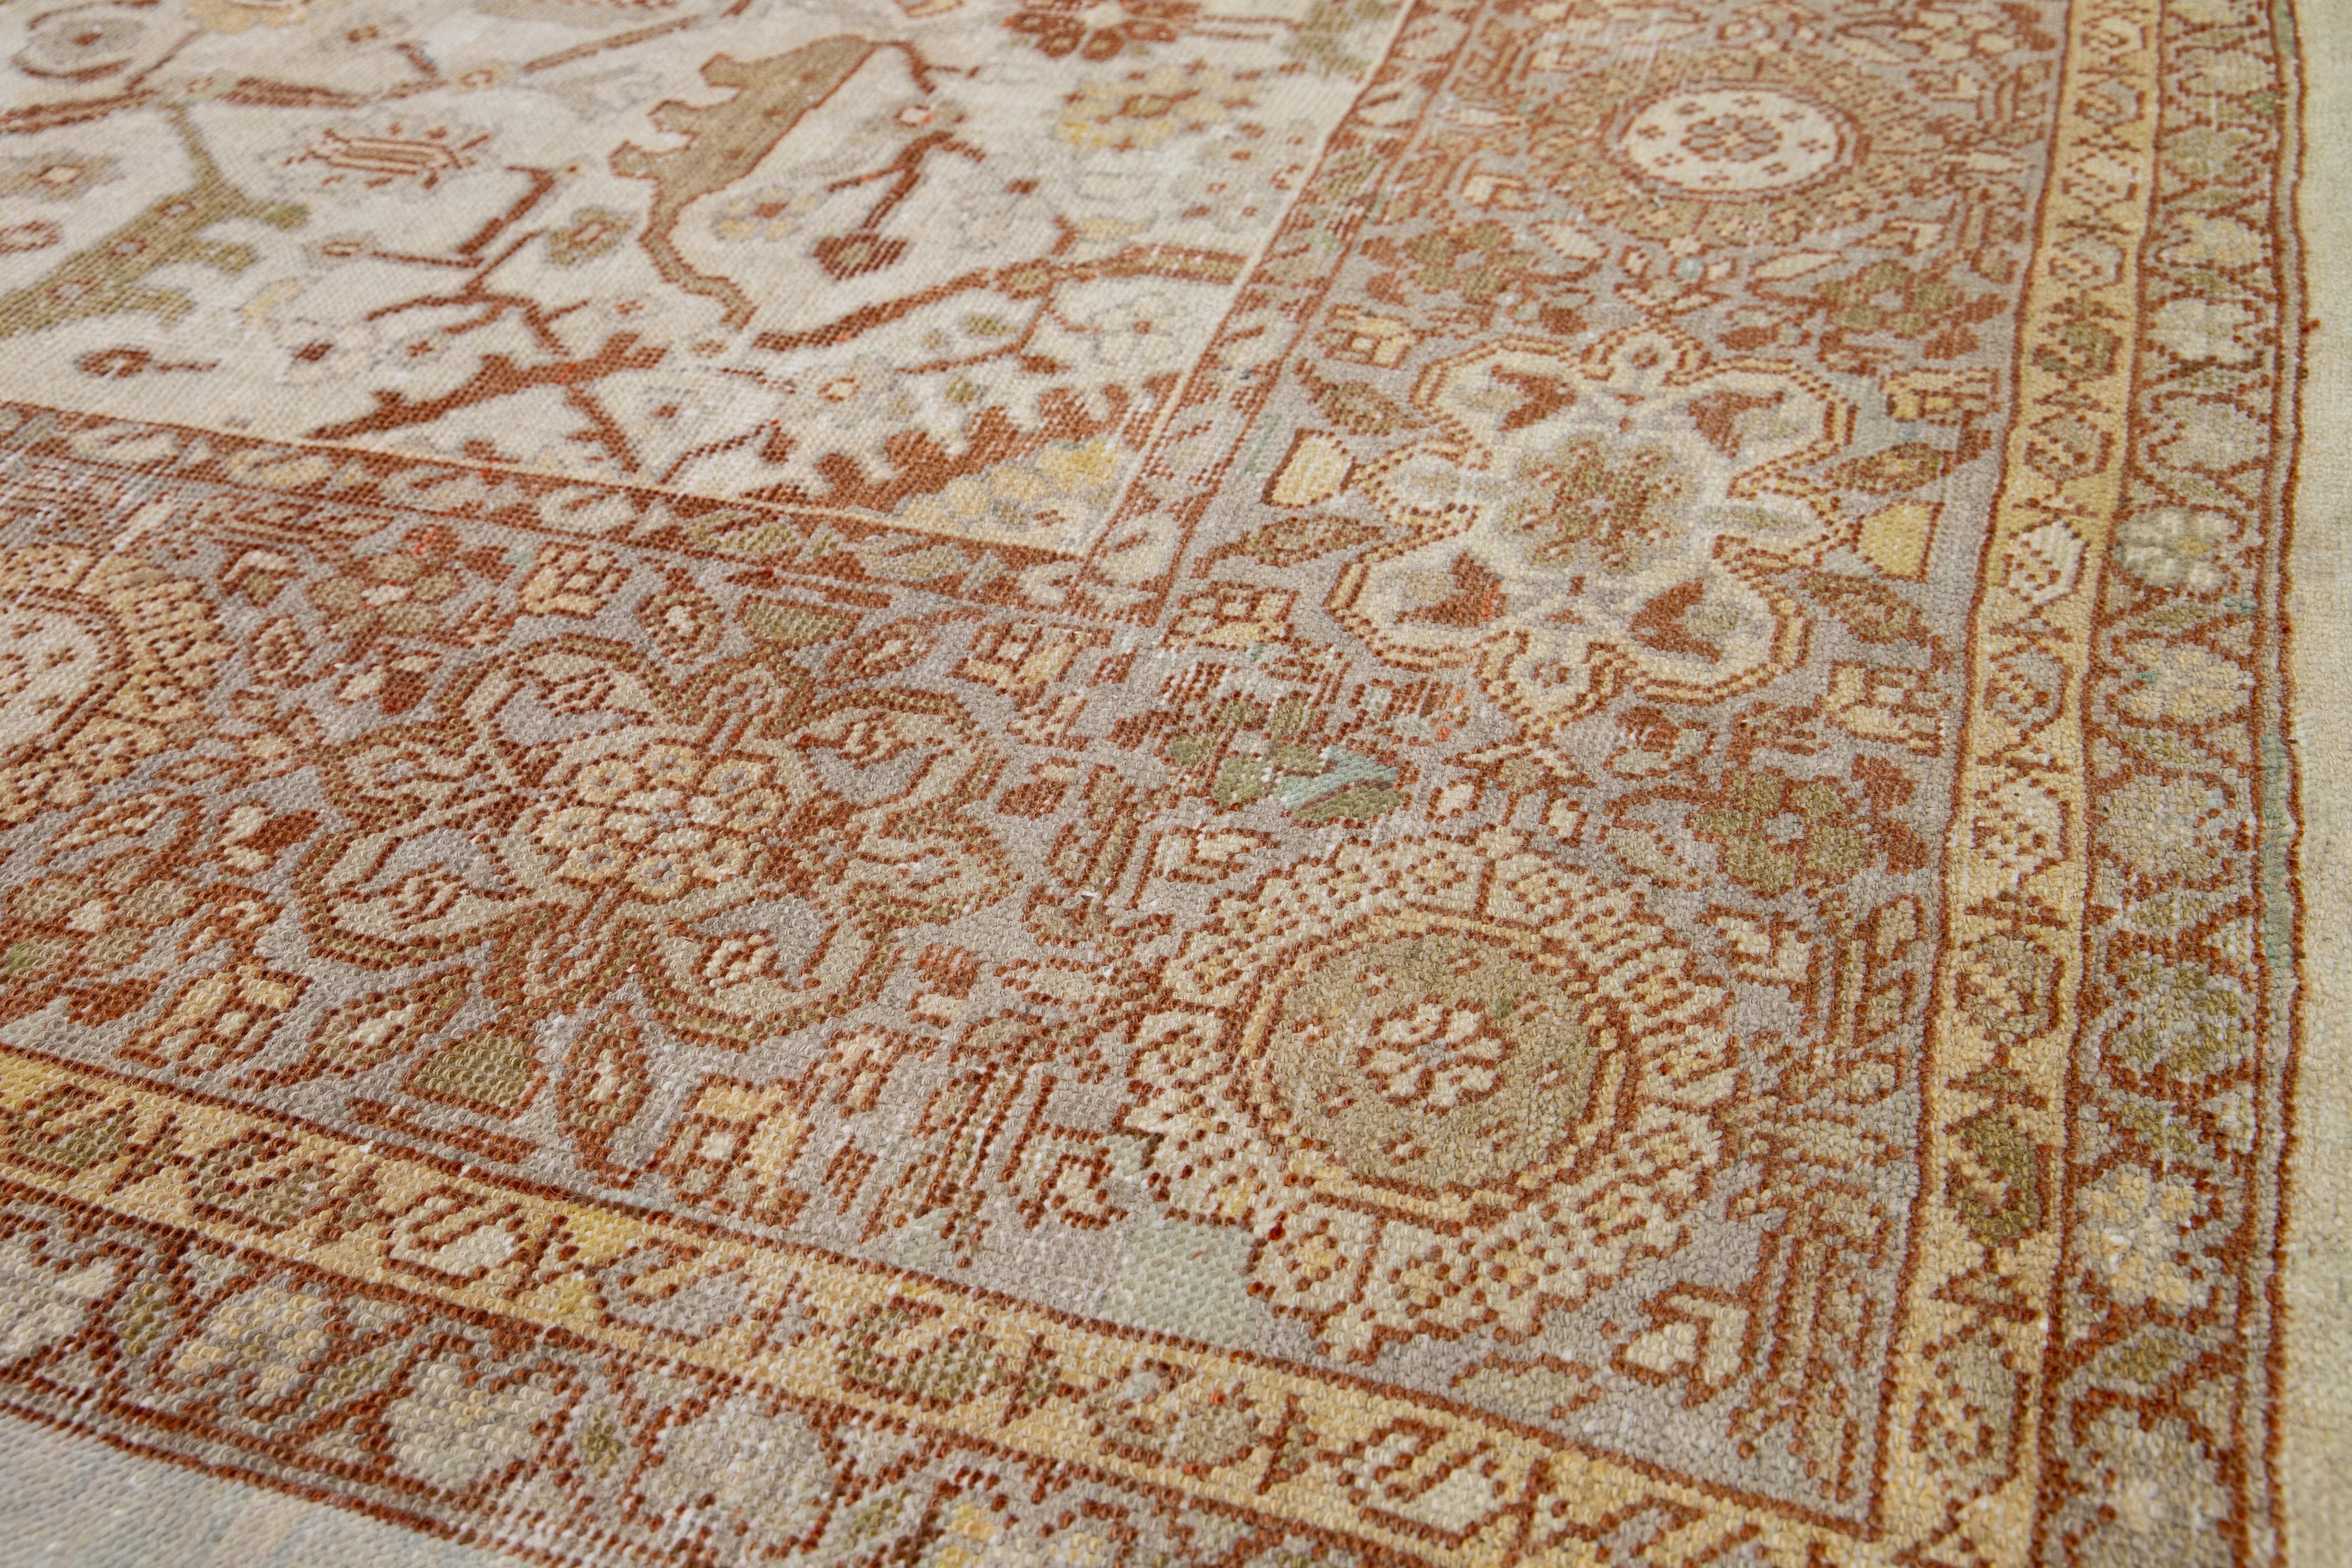 1900s Sultanabad Persian Gallery Wool Rug In Beige and Orange With Floral Motif For Sale 3